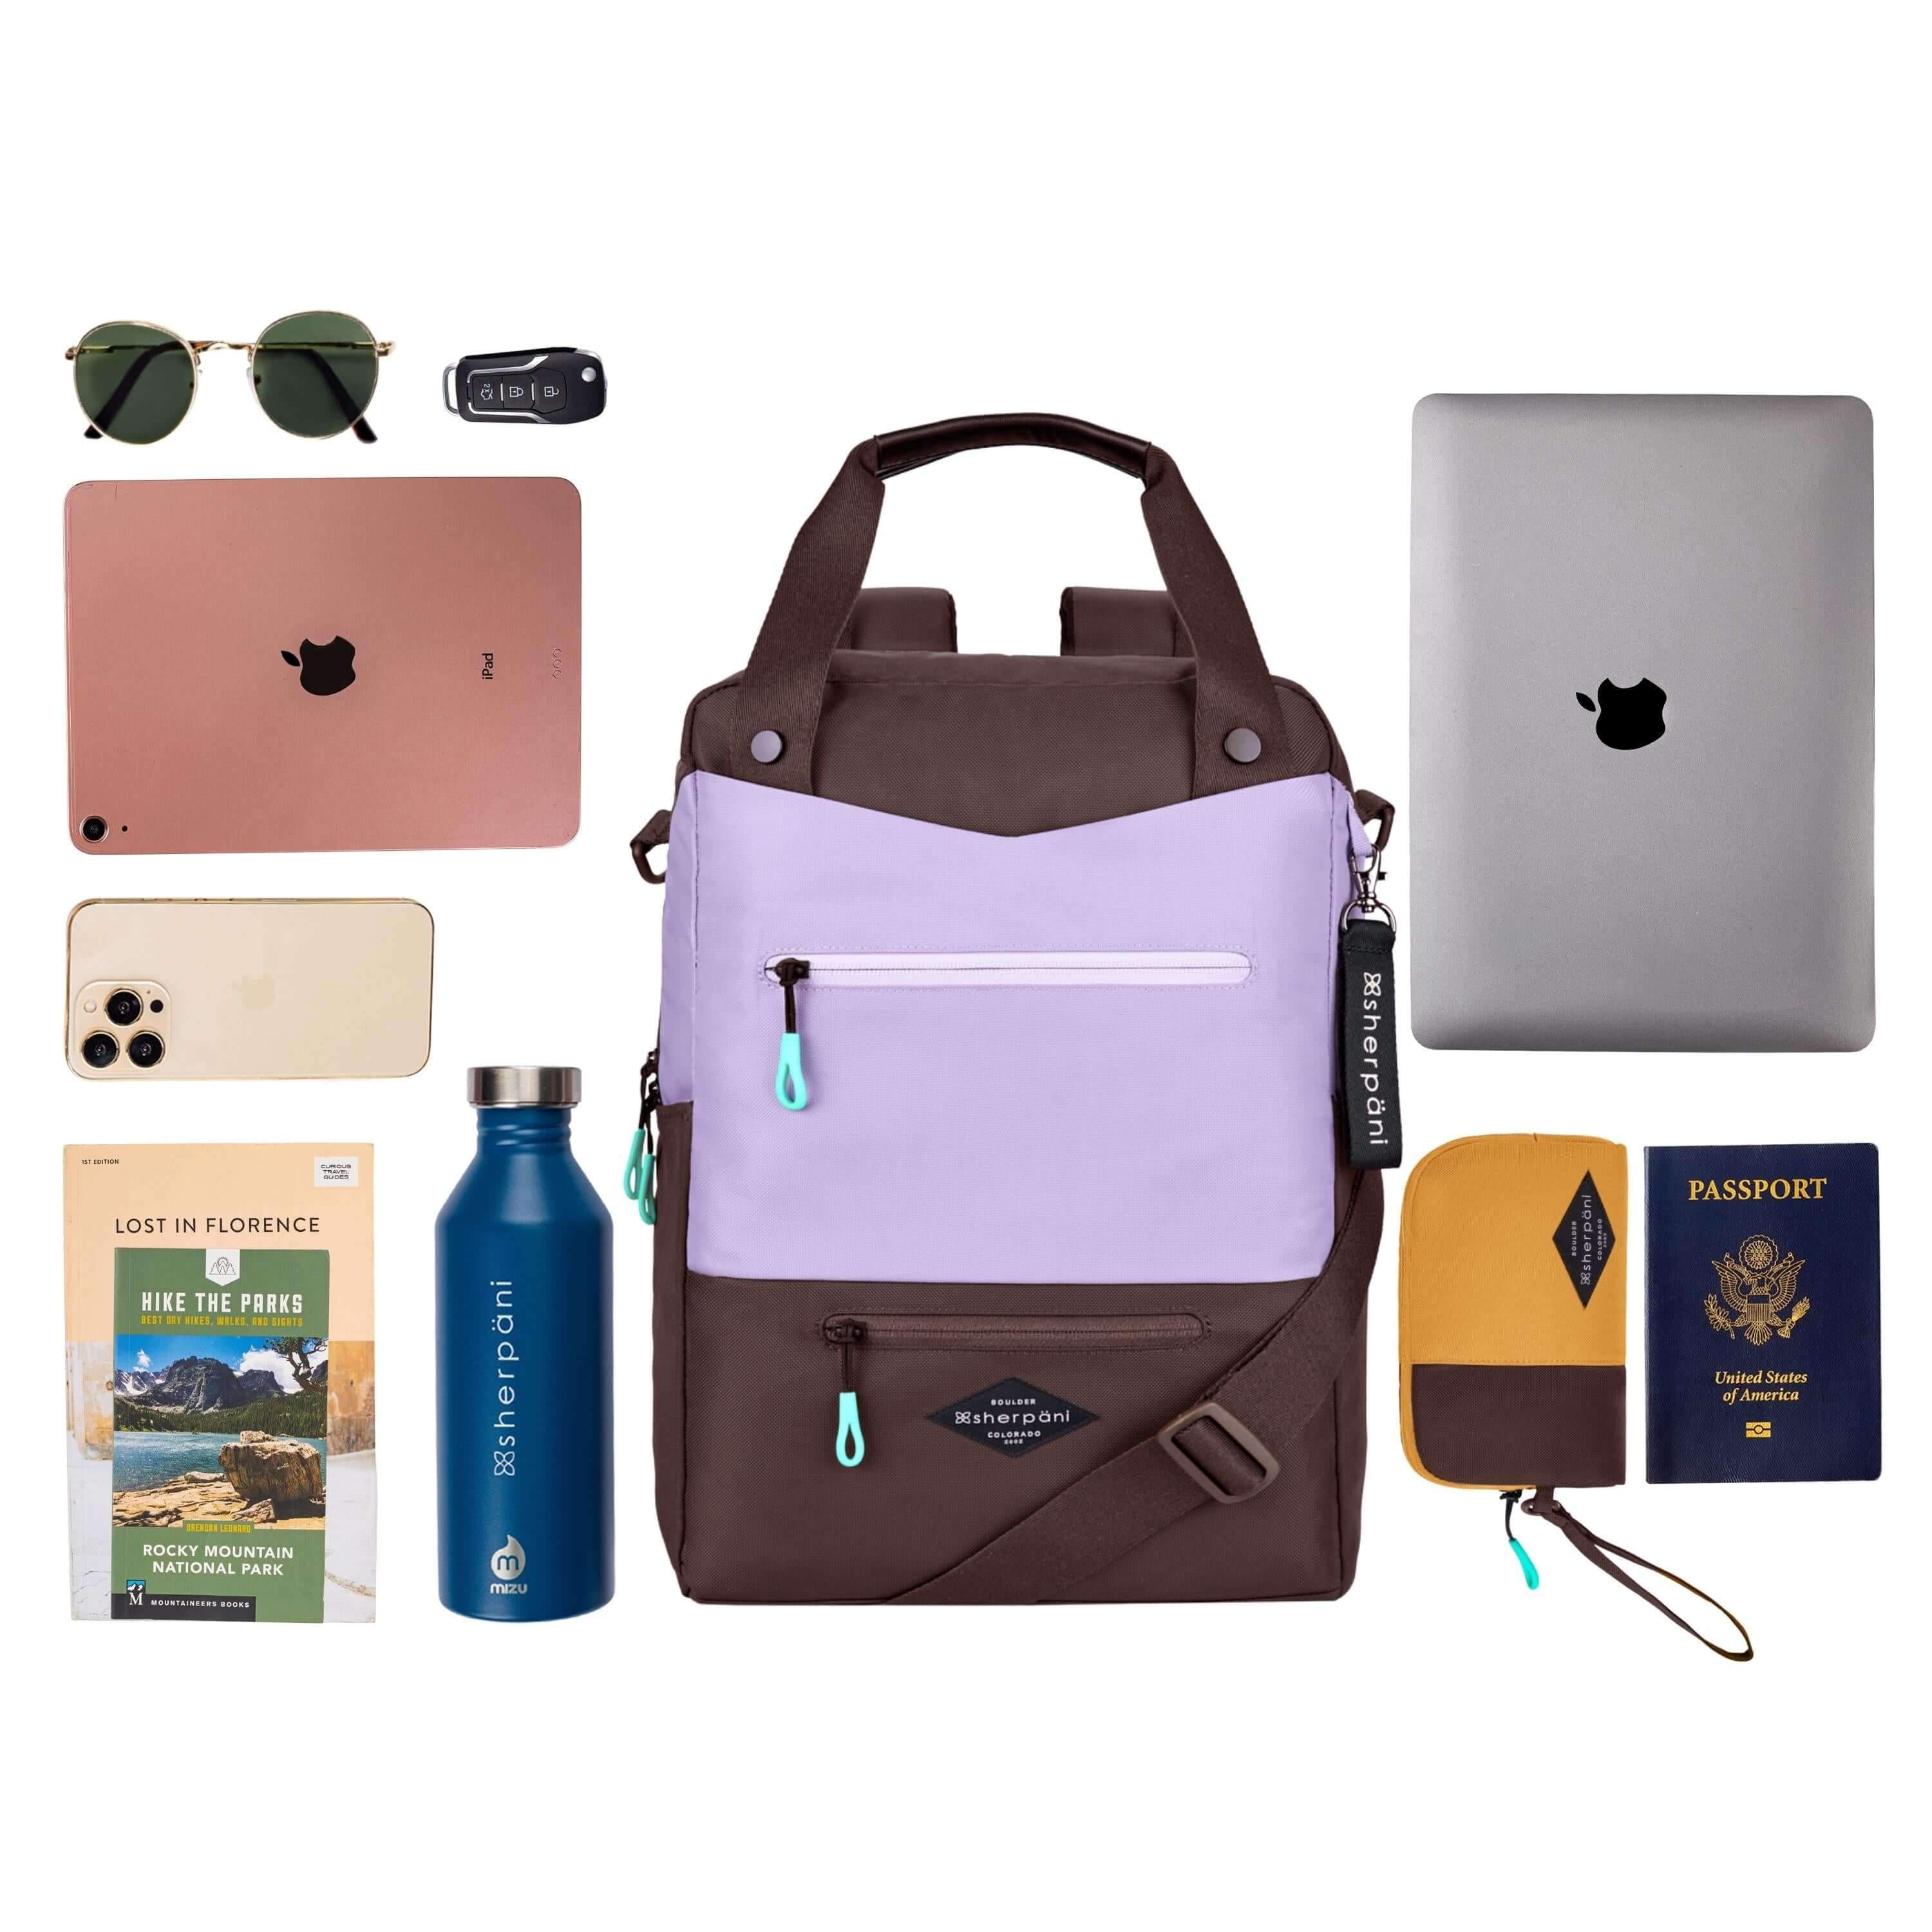 Top view of example items to fill the bag. Sherpani's three-in-one bag, the Camden in Lavender, lies in the center. It is surrounded by an assortment of items: sunglasses, car key, tablet, phone, travel books, water bottle, laptop, passport and Sherpani travel accessory the Jolie in Sundial. 